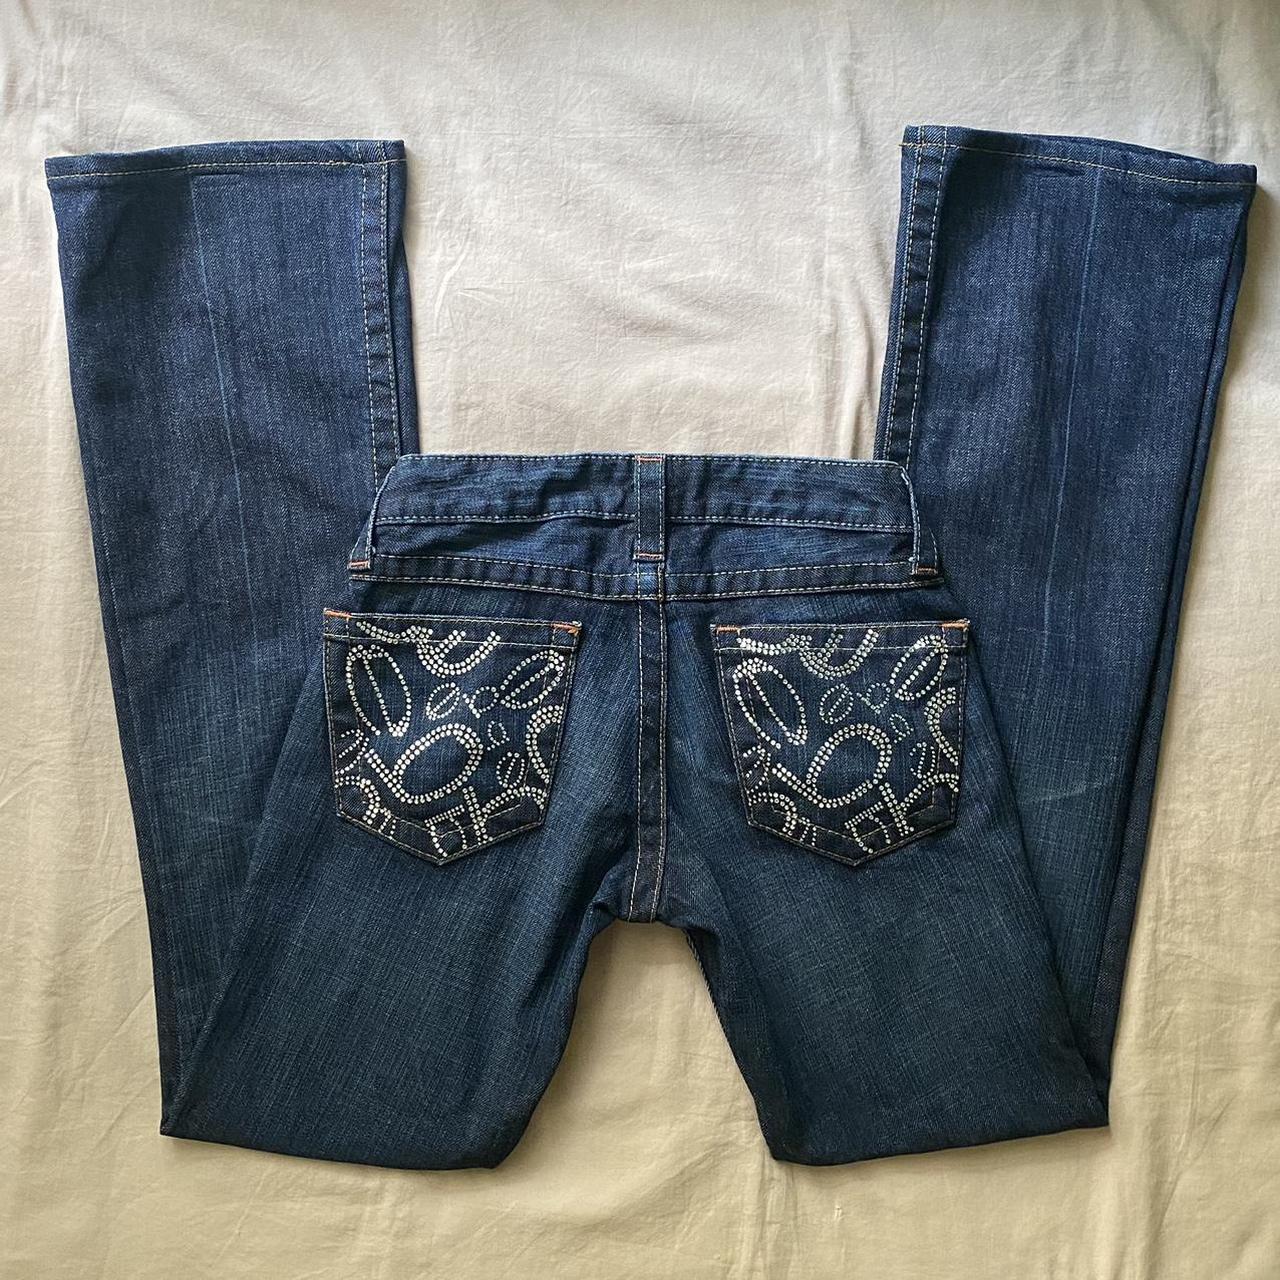 Bebe Bedazzled Flare Jeans Iconic Y2k low rise... - Depop